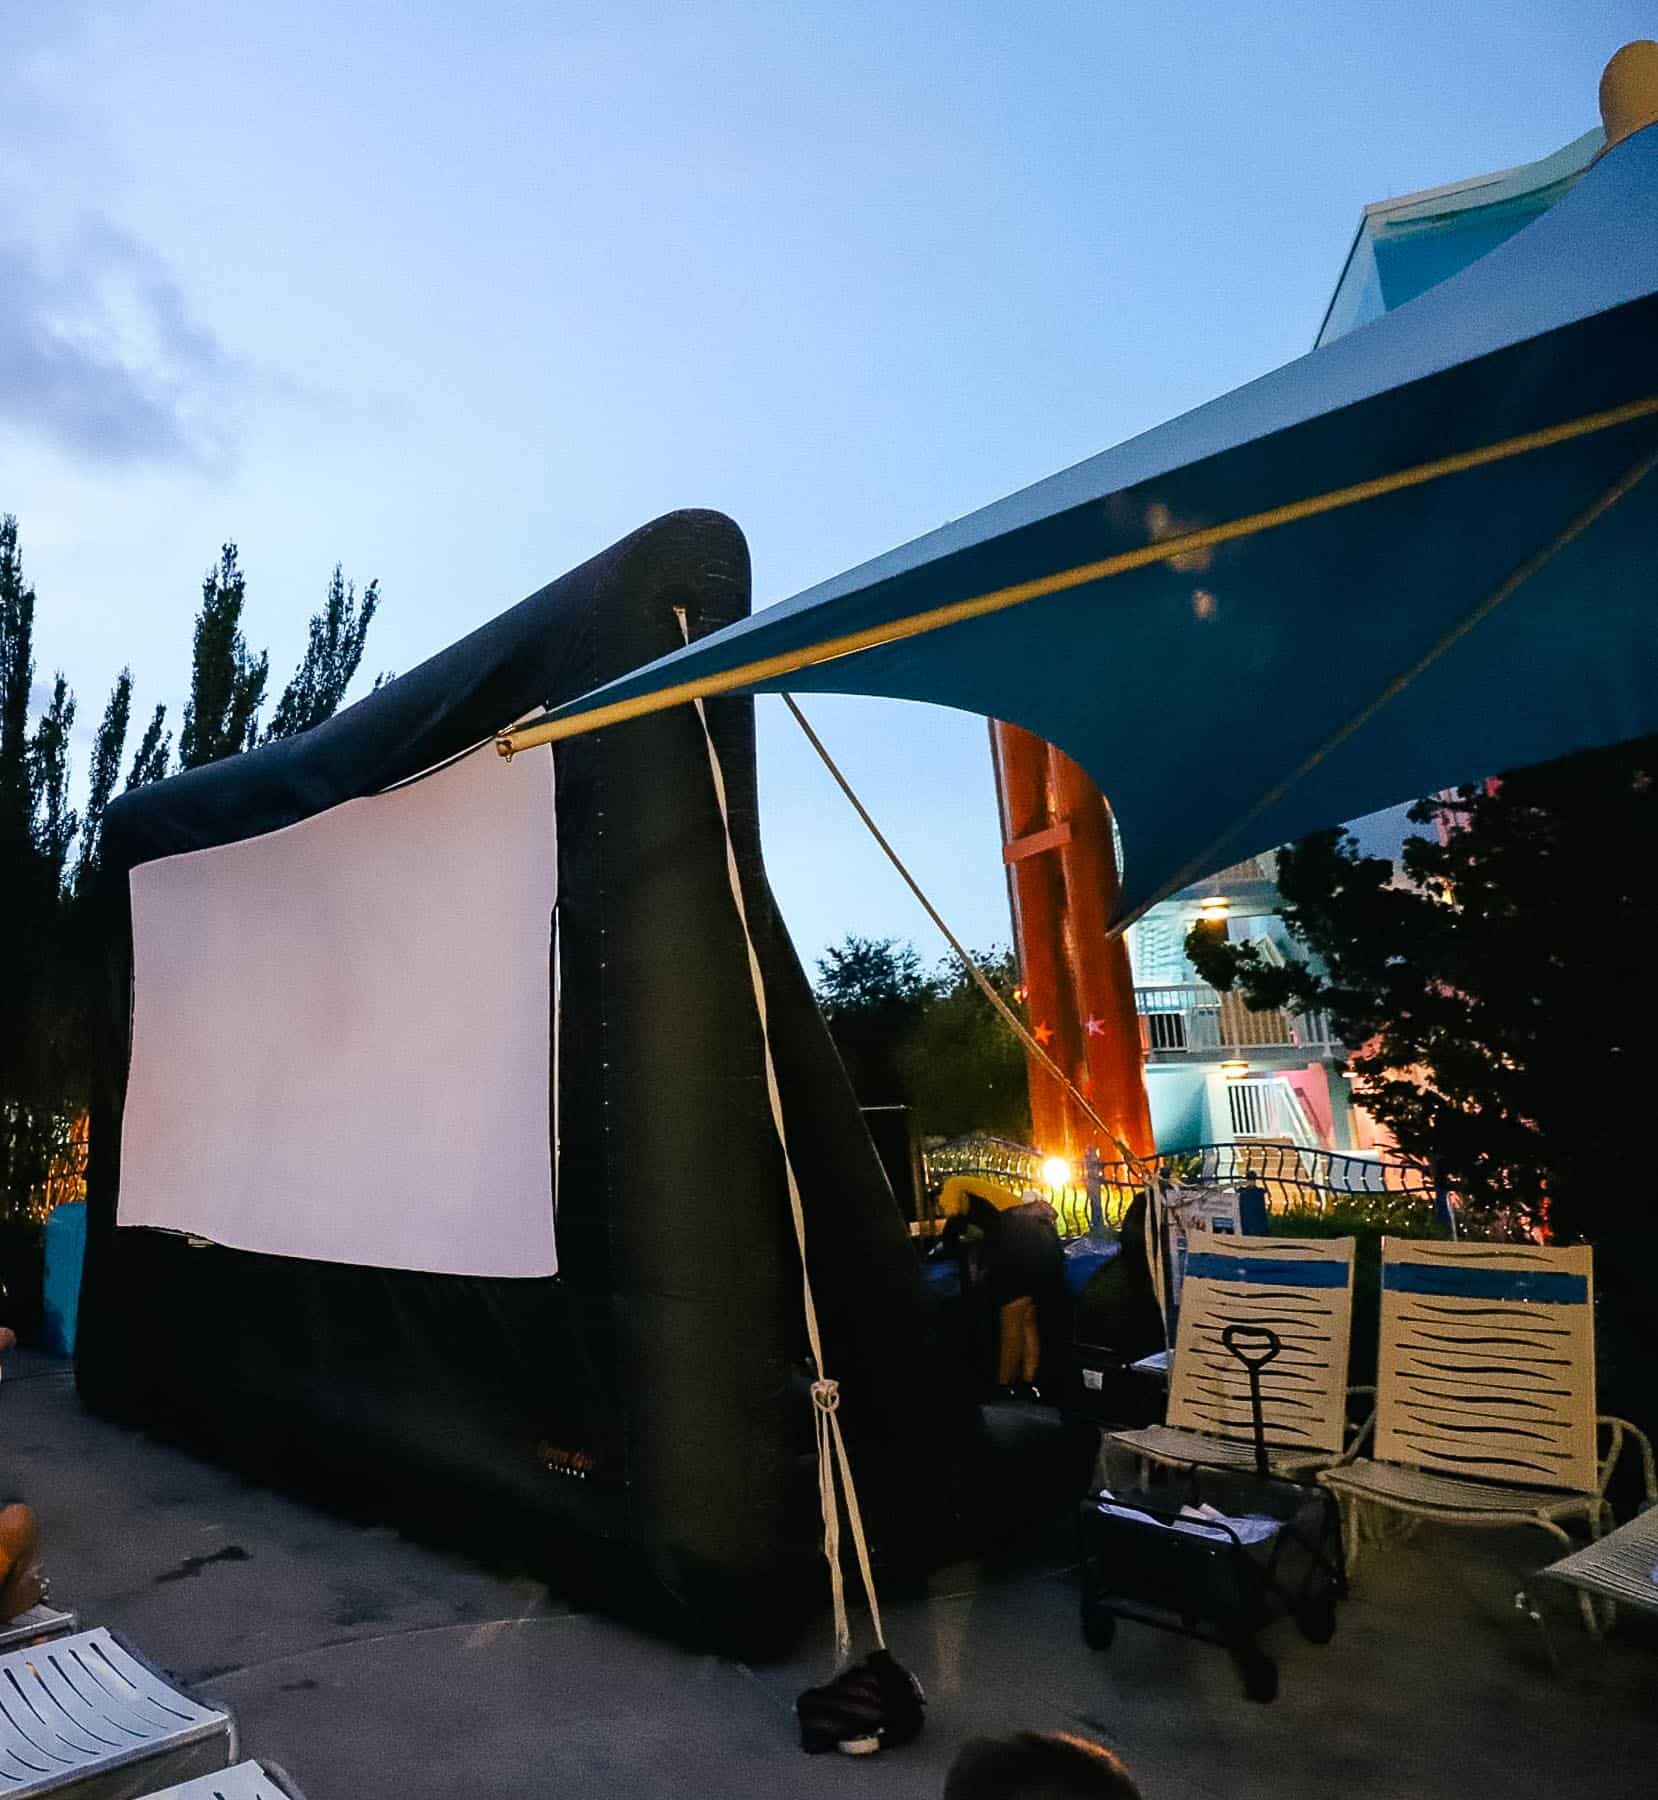 Movies by the Pool at Disney's Art of Animation 